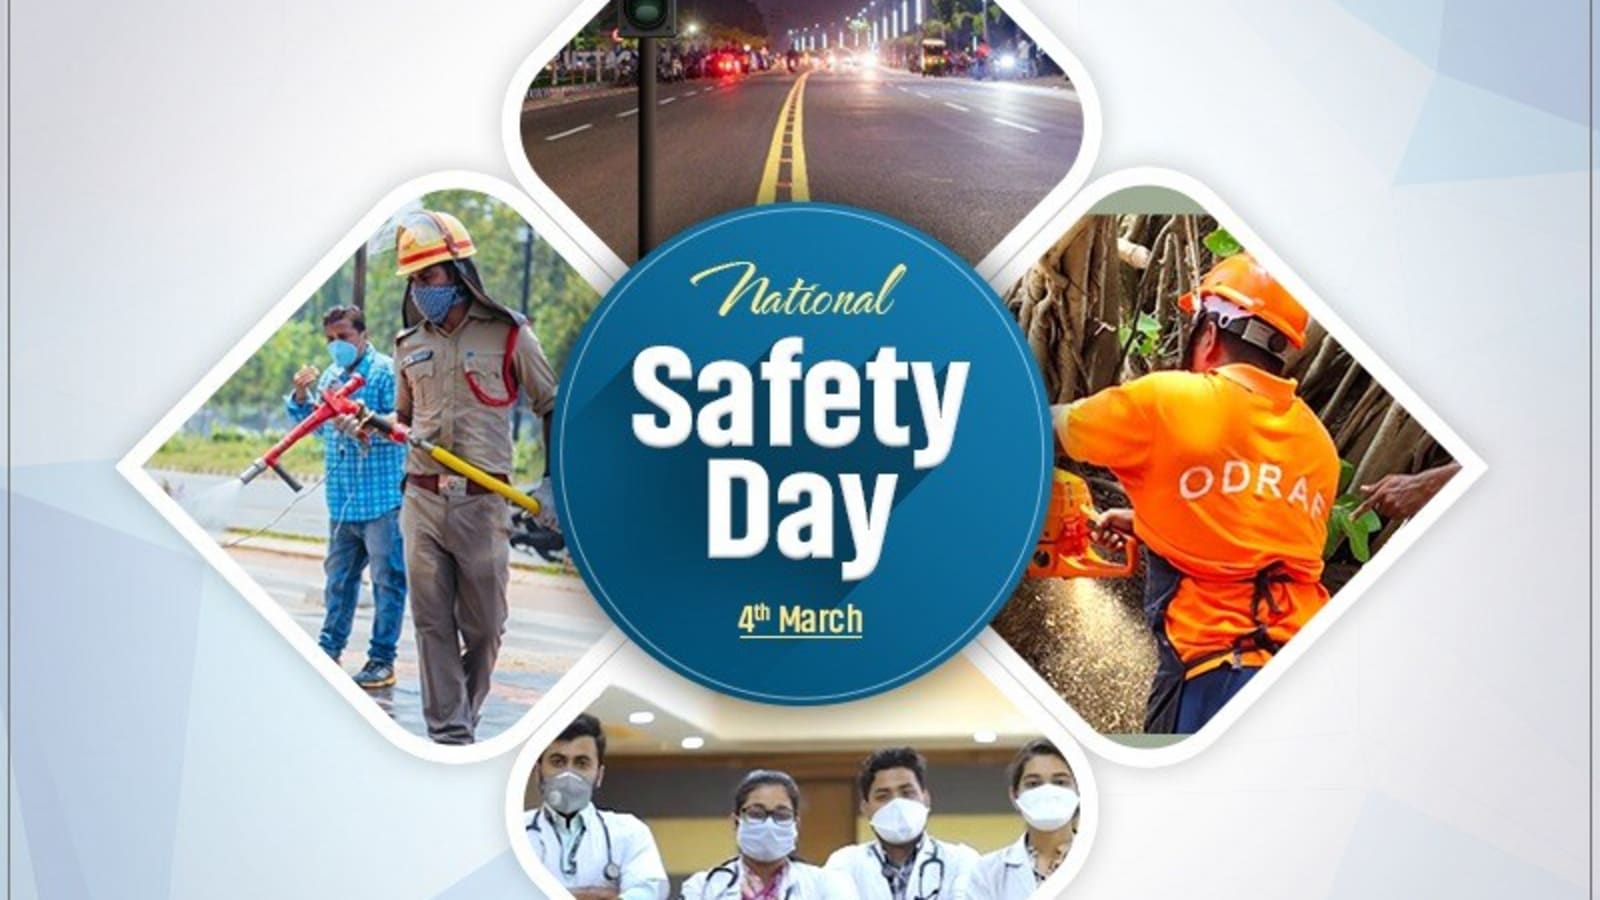 National Safety Day Leaders tweet about “better, safer, healthier